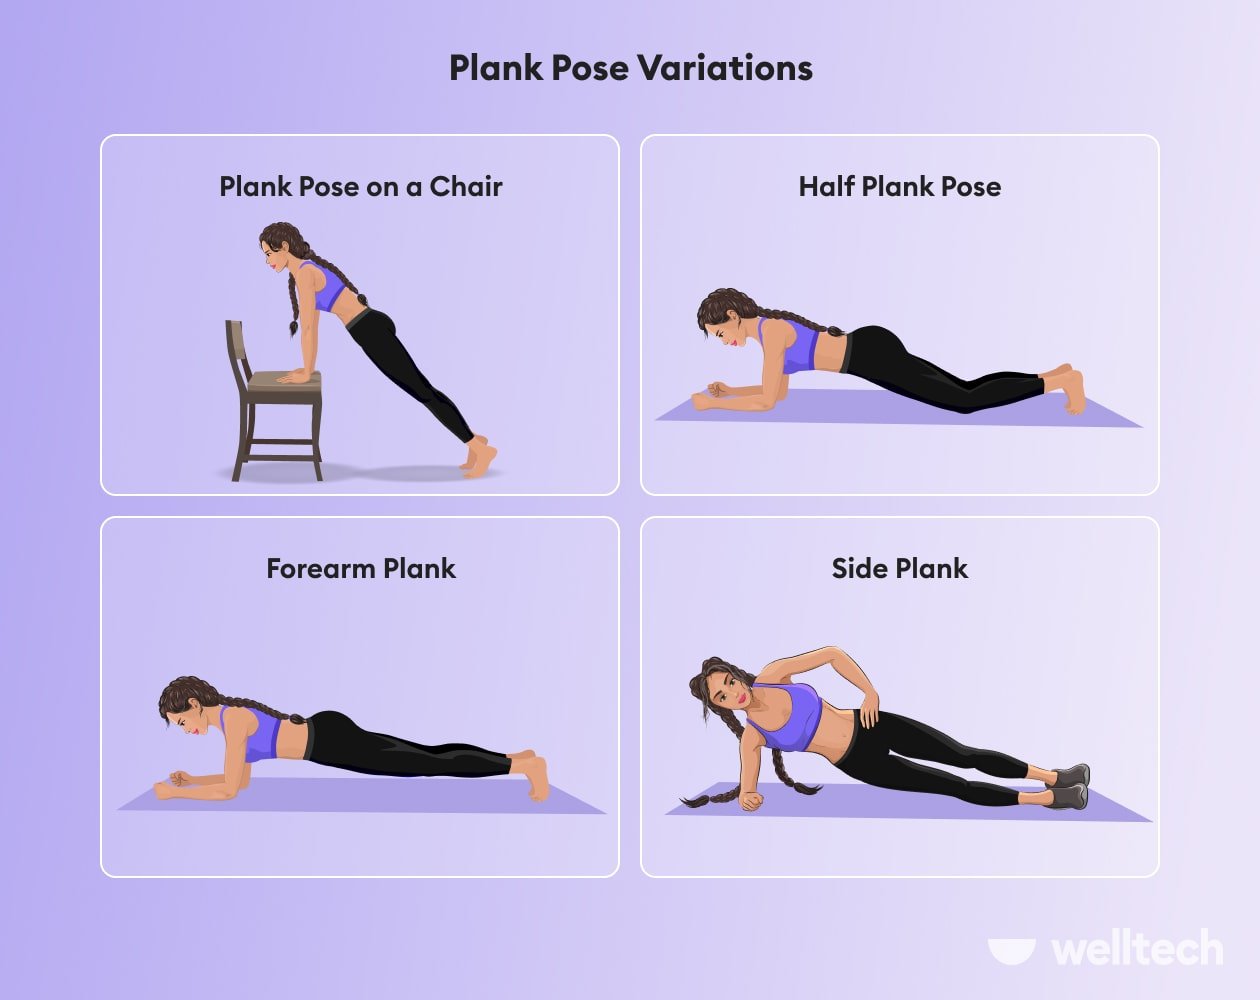 Yoga daily tips and advices - Upward plank pose benefits 👍 | Facebook